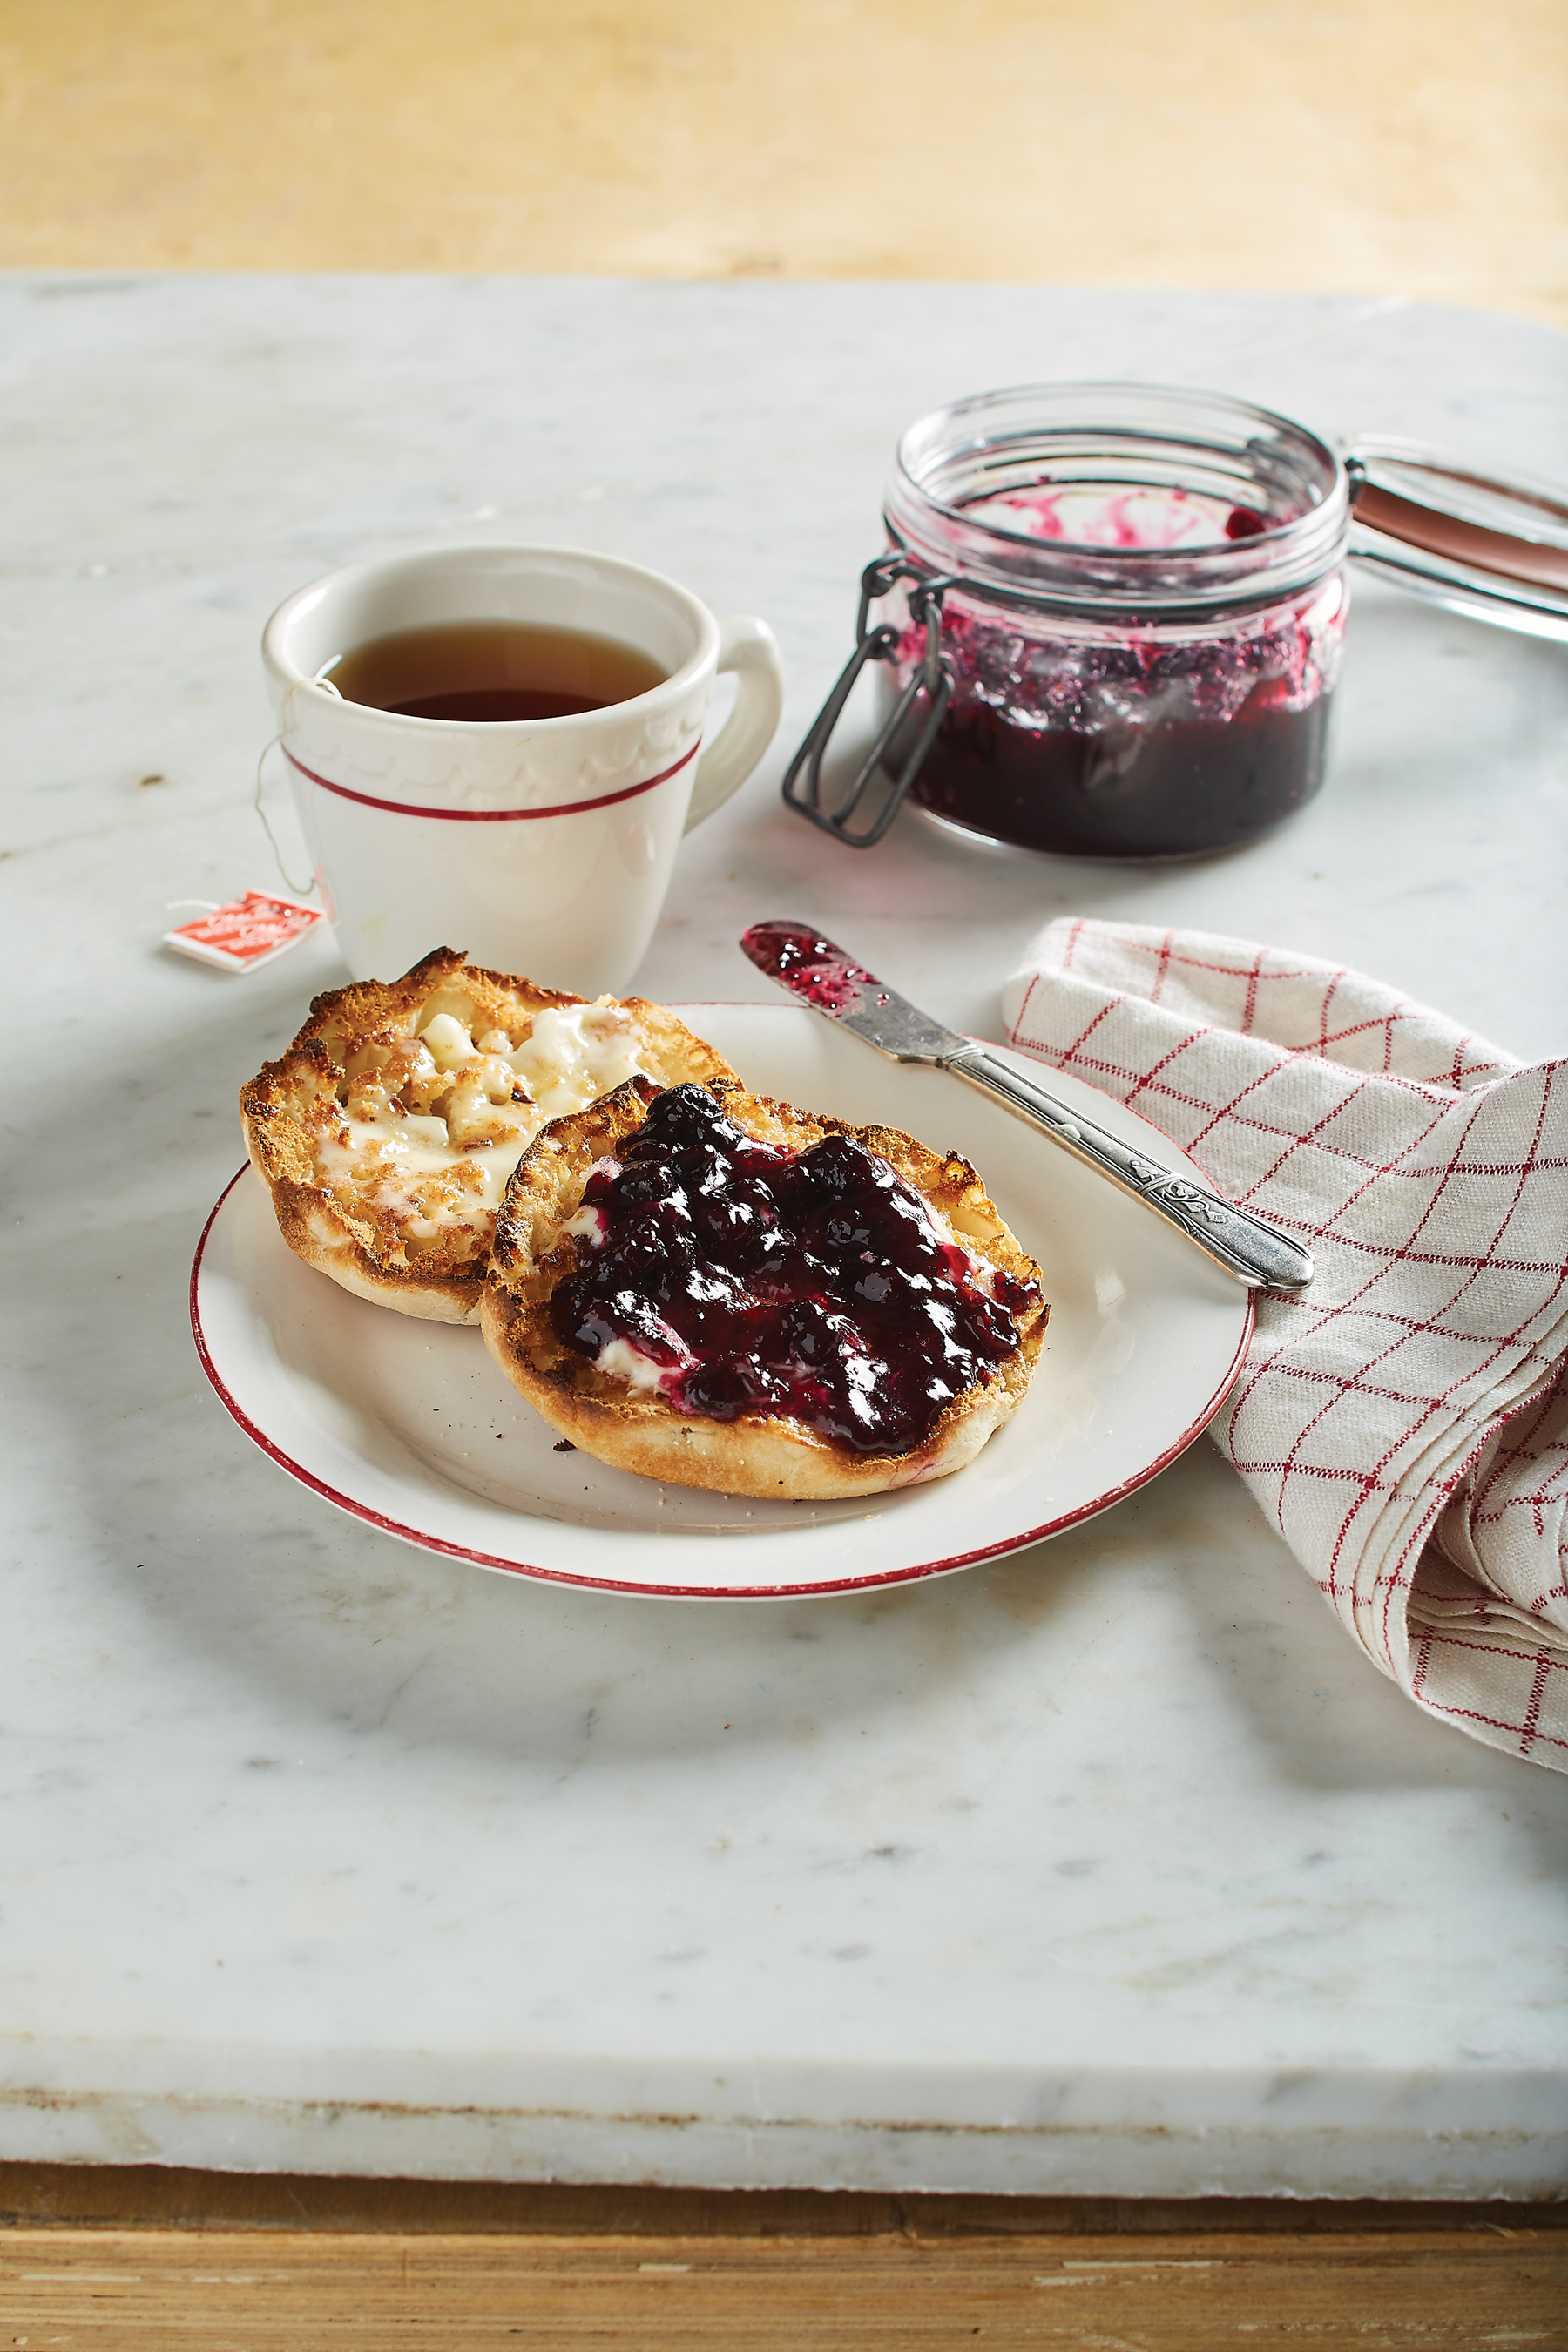 Scone covered in blueberry jam on plate in fromy of mug of tea and jar of jam